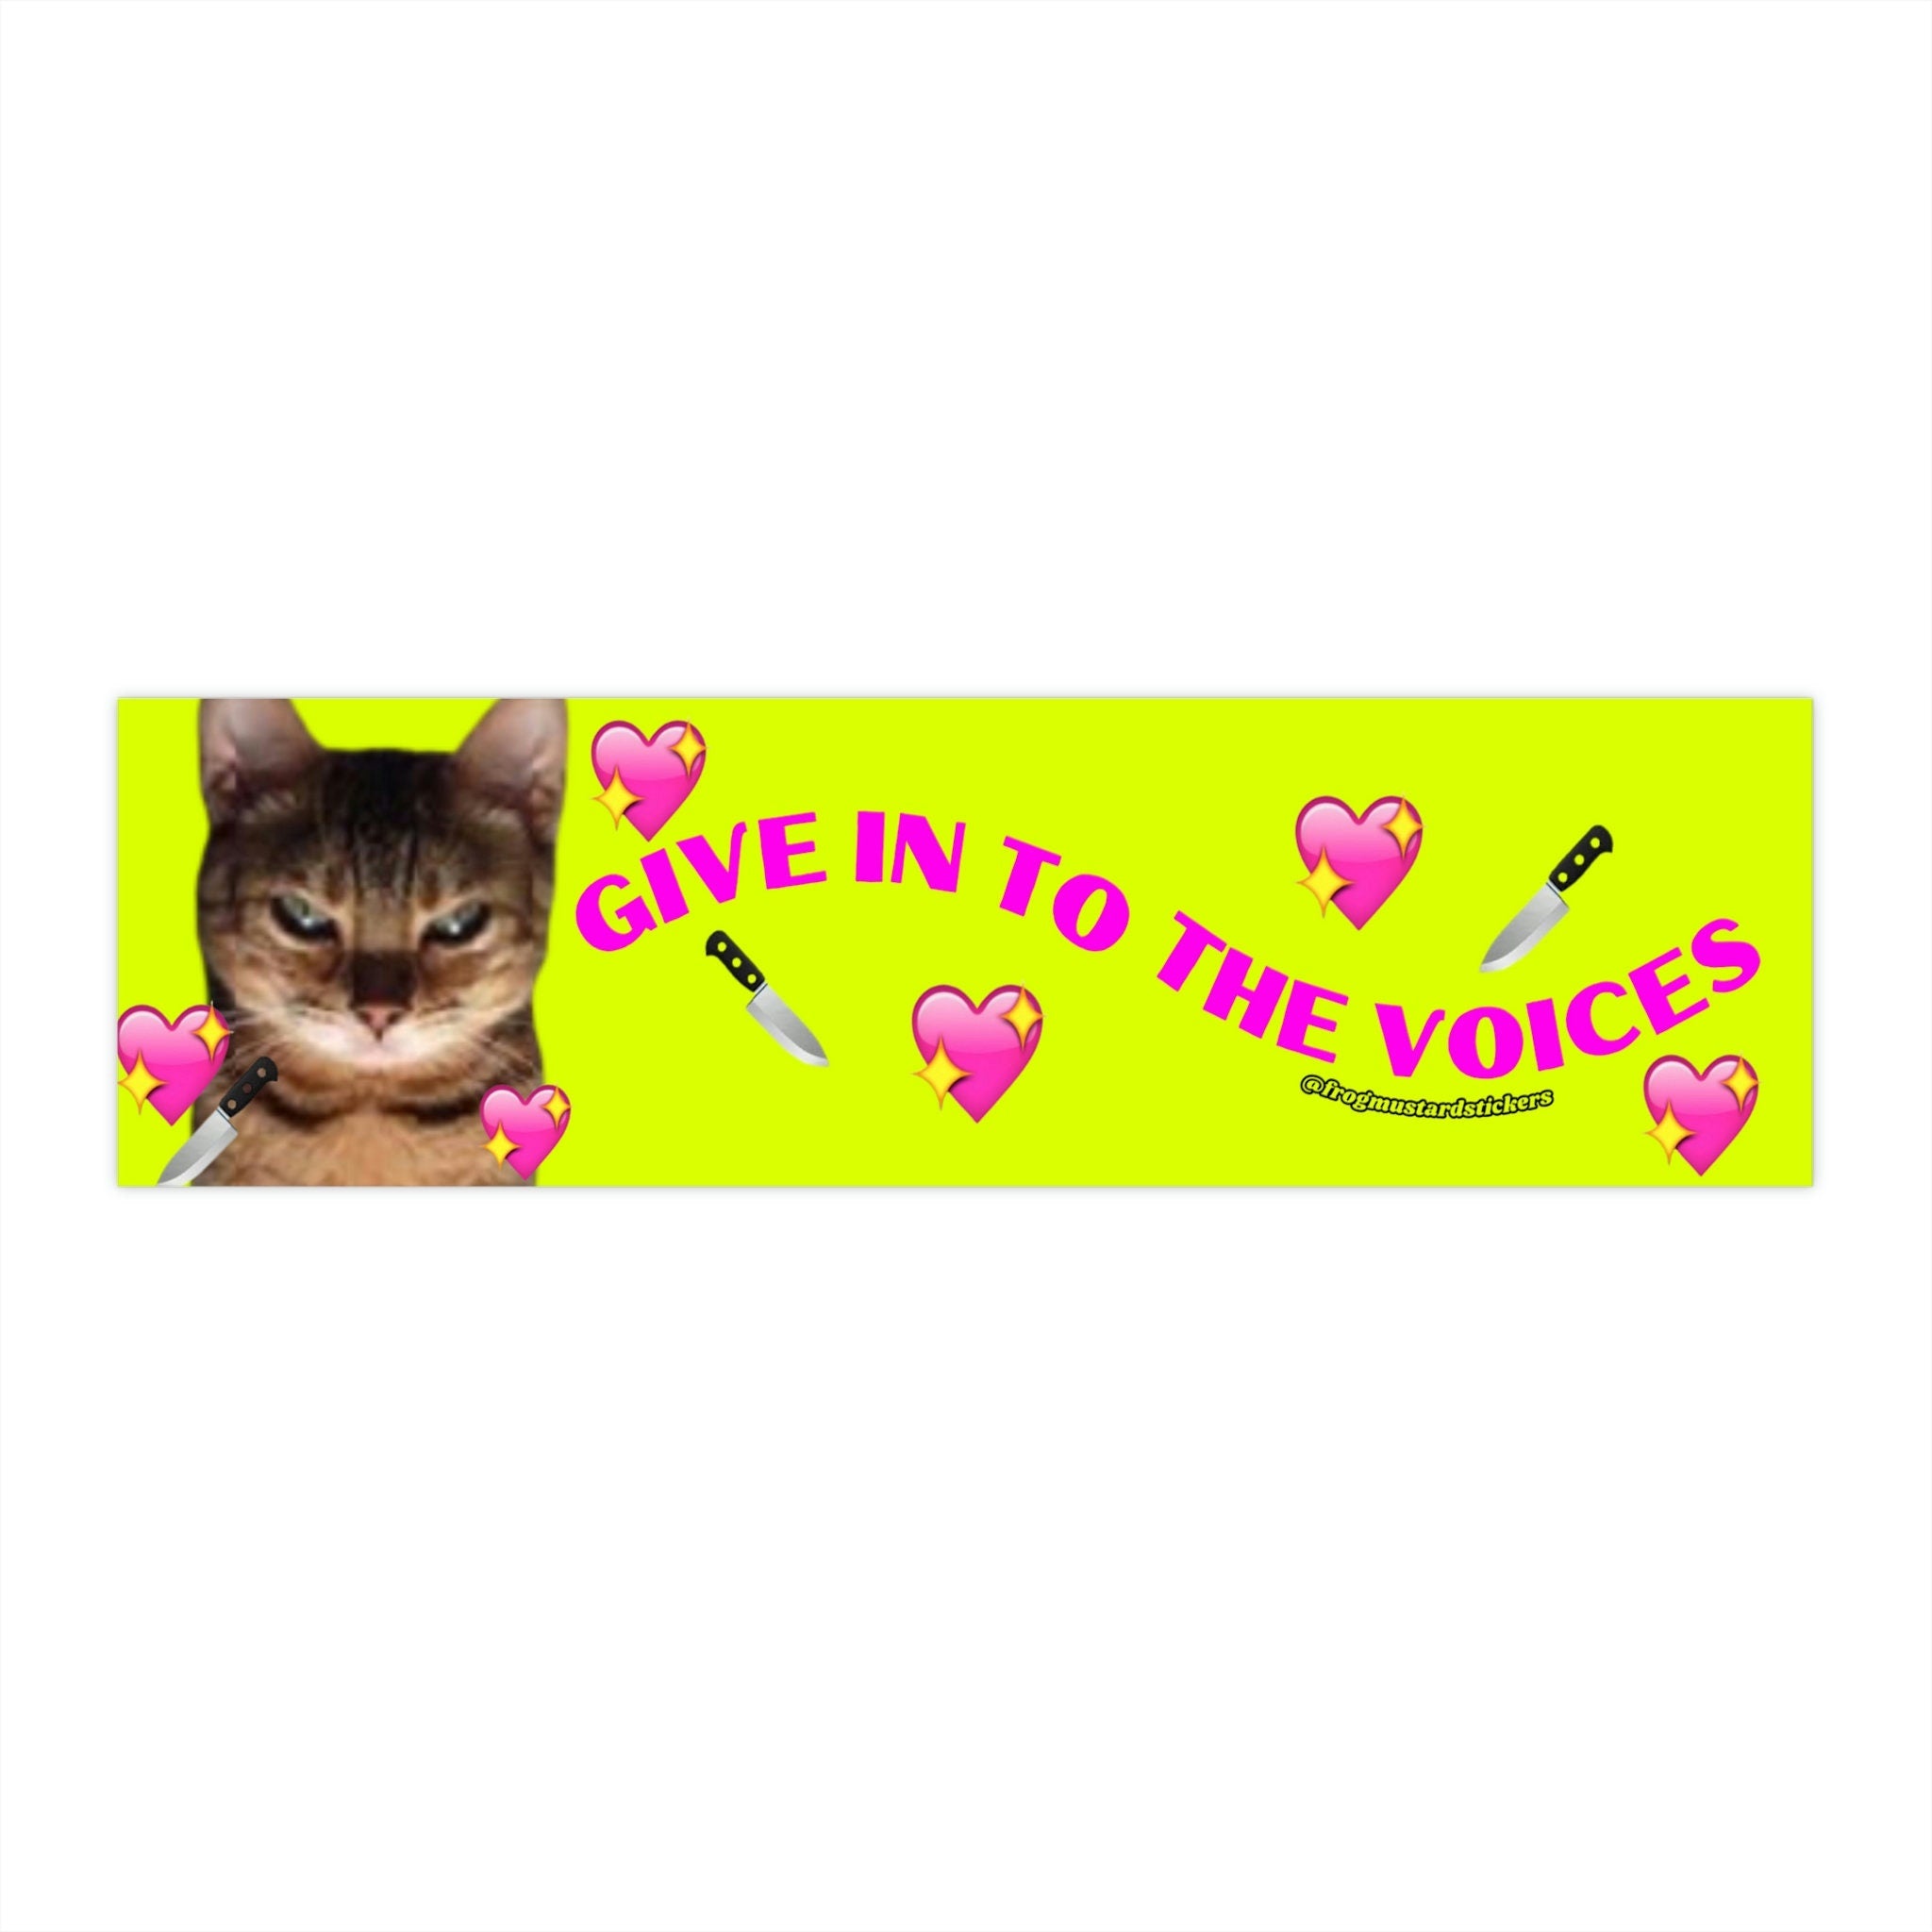 Give in to the voices cat Bumper Sticker OR Magnet | Satire | Gen Z Humor | 8.5" x 2.5"